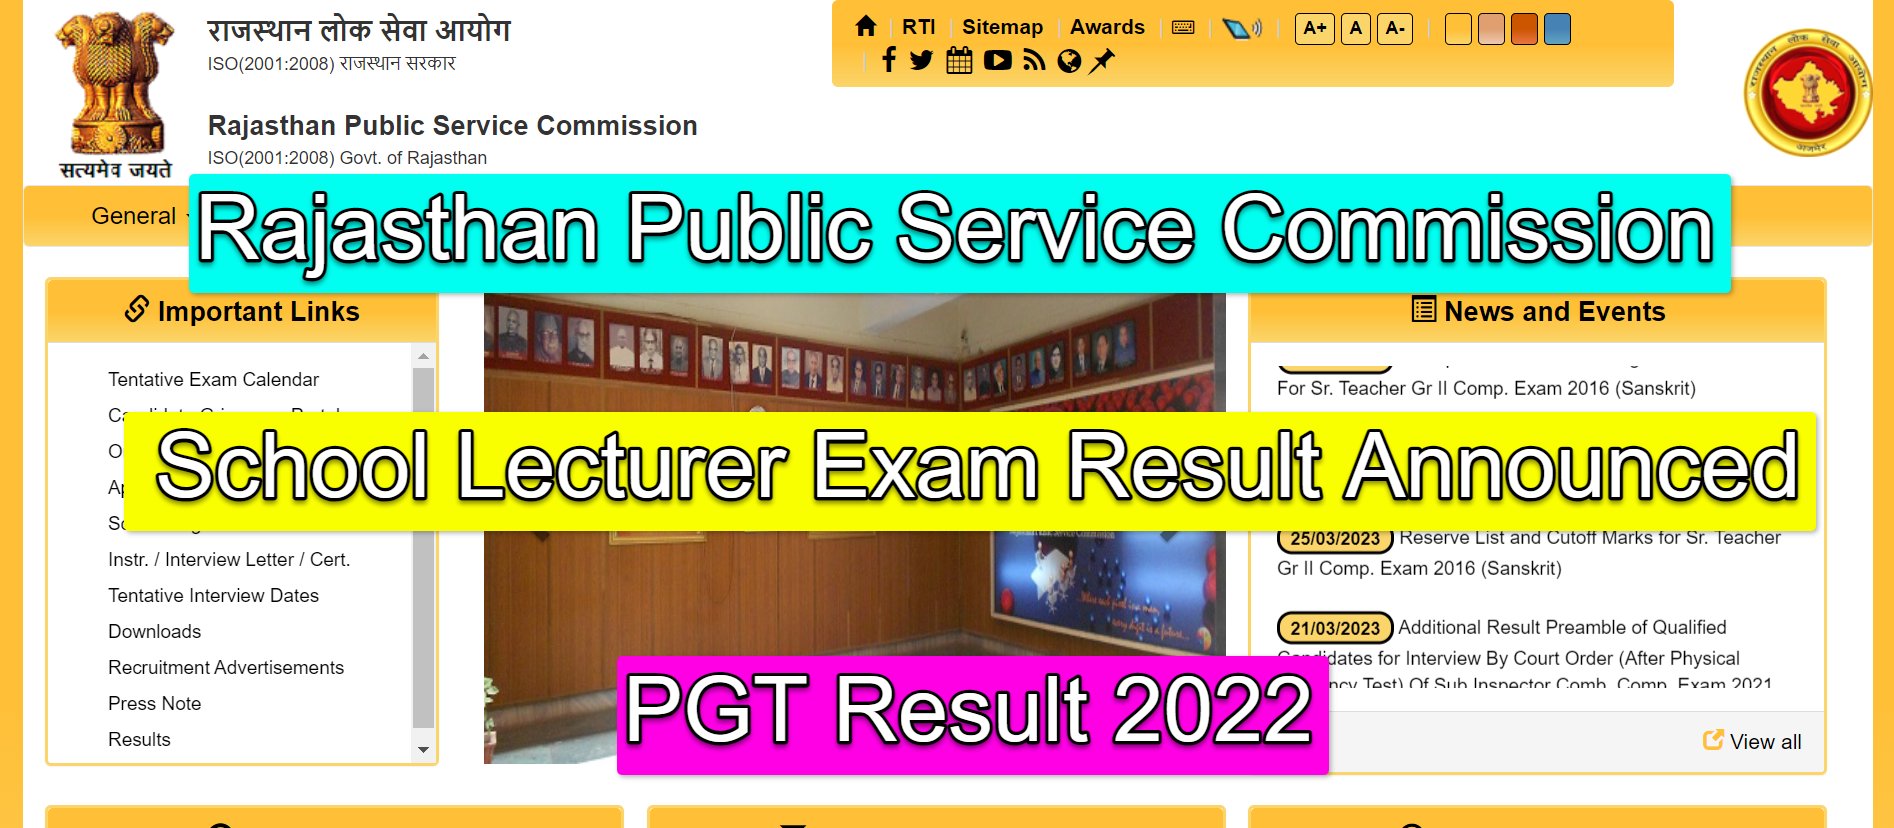 RPSC PGT Result 2022 - School Lecturer Exam Result Announced